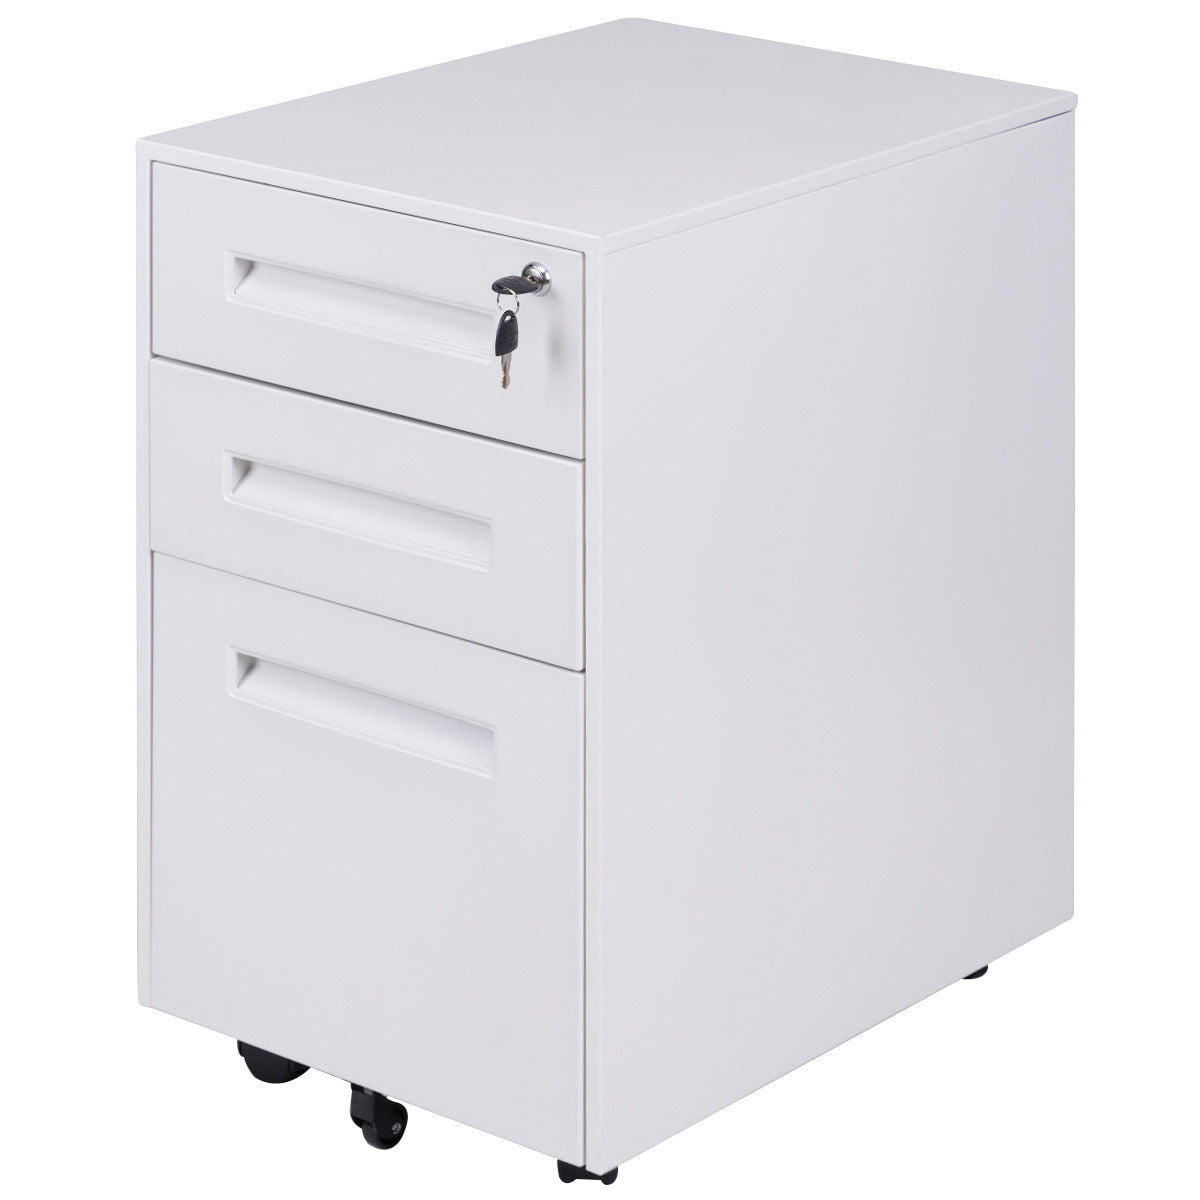 Gymax Rolling A4 File Cabinet Sliding Drawer Metal Office